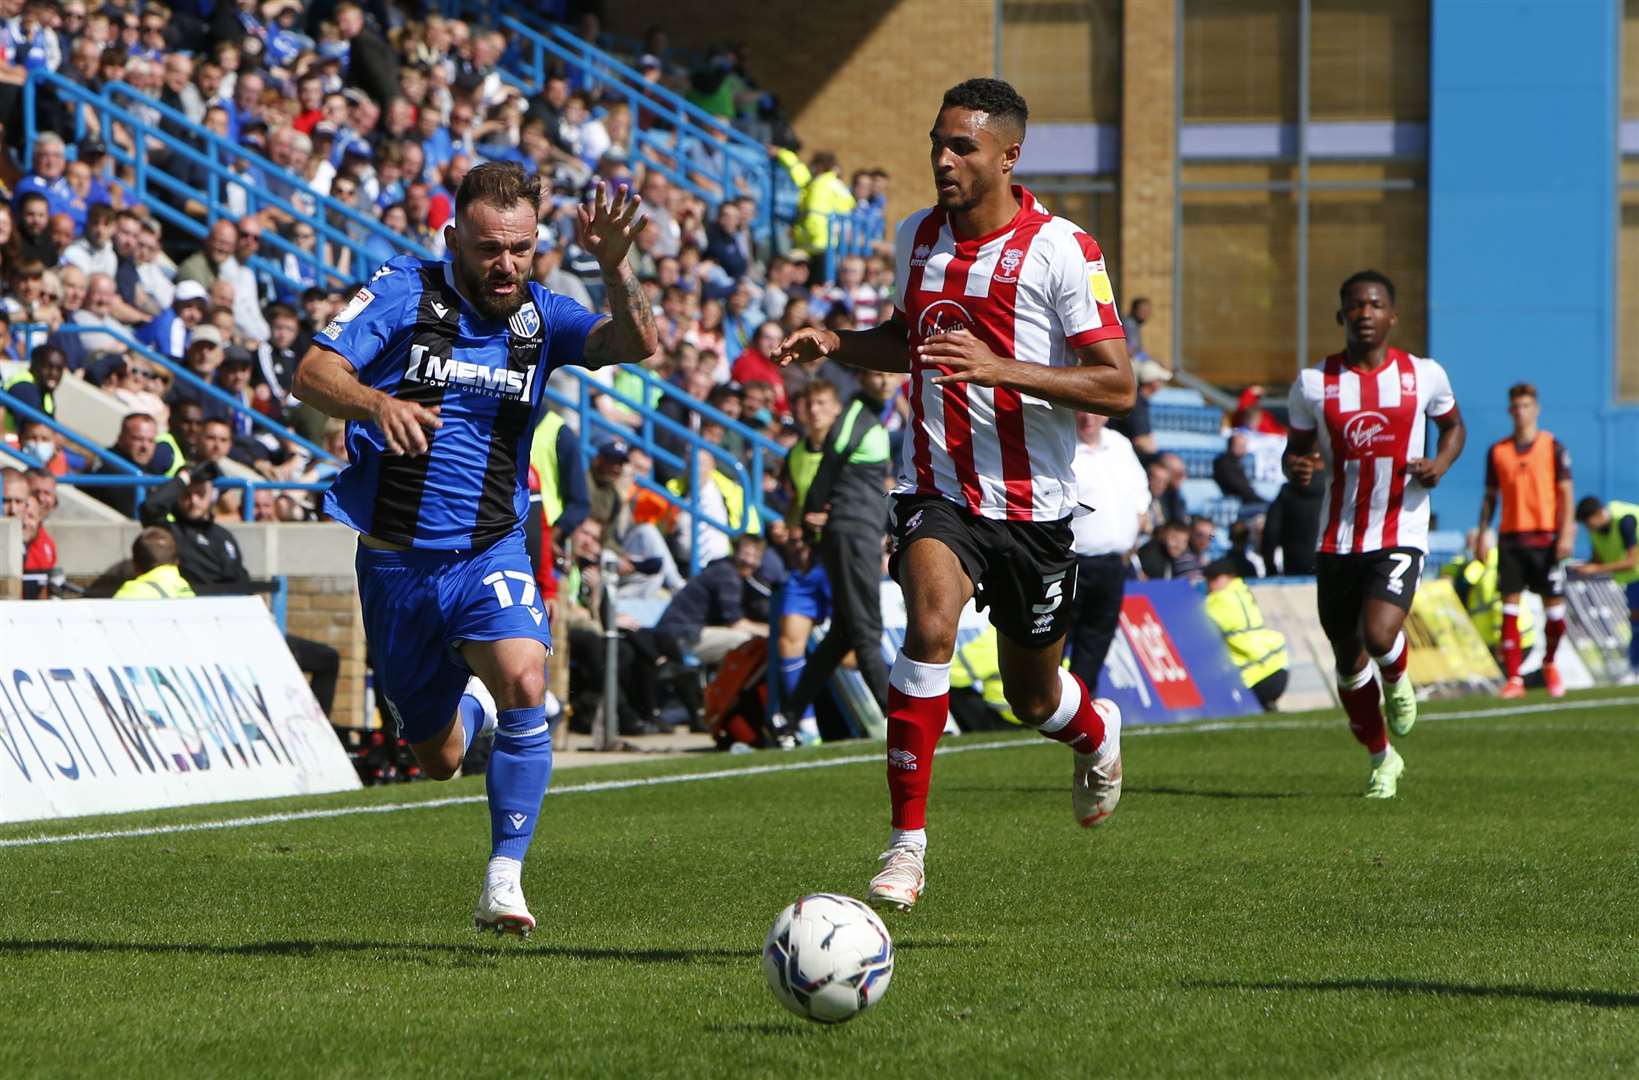 Danny Lloyd gives chase for Gillingham. Picture: Andy Jones (49990660)